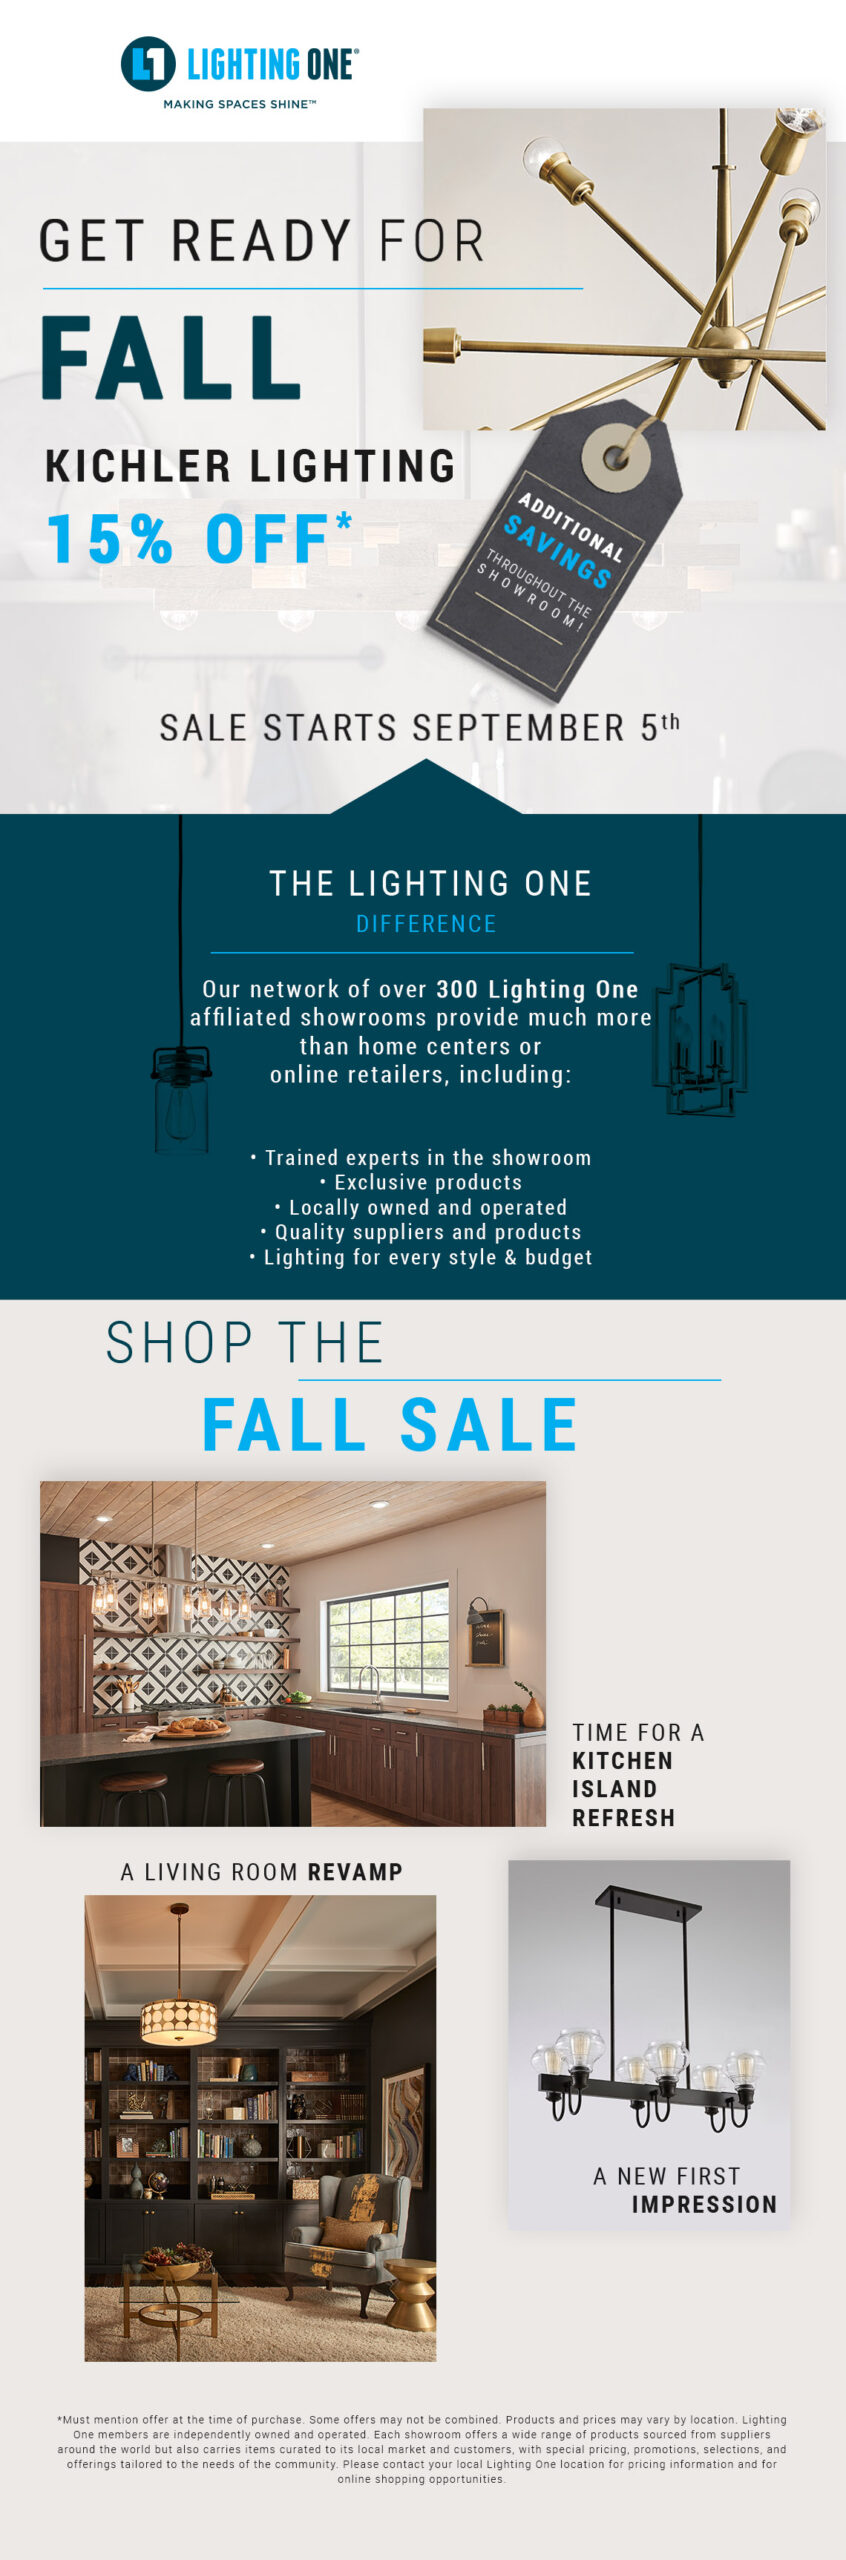 Get Ready for Fall Kichler Lighting 15% Off